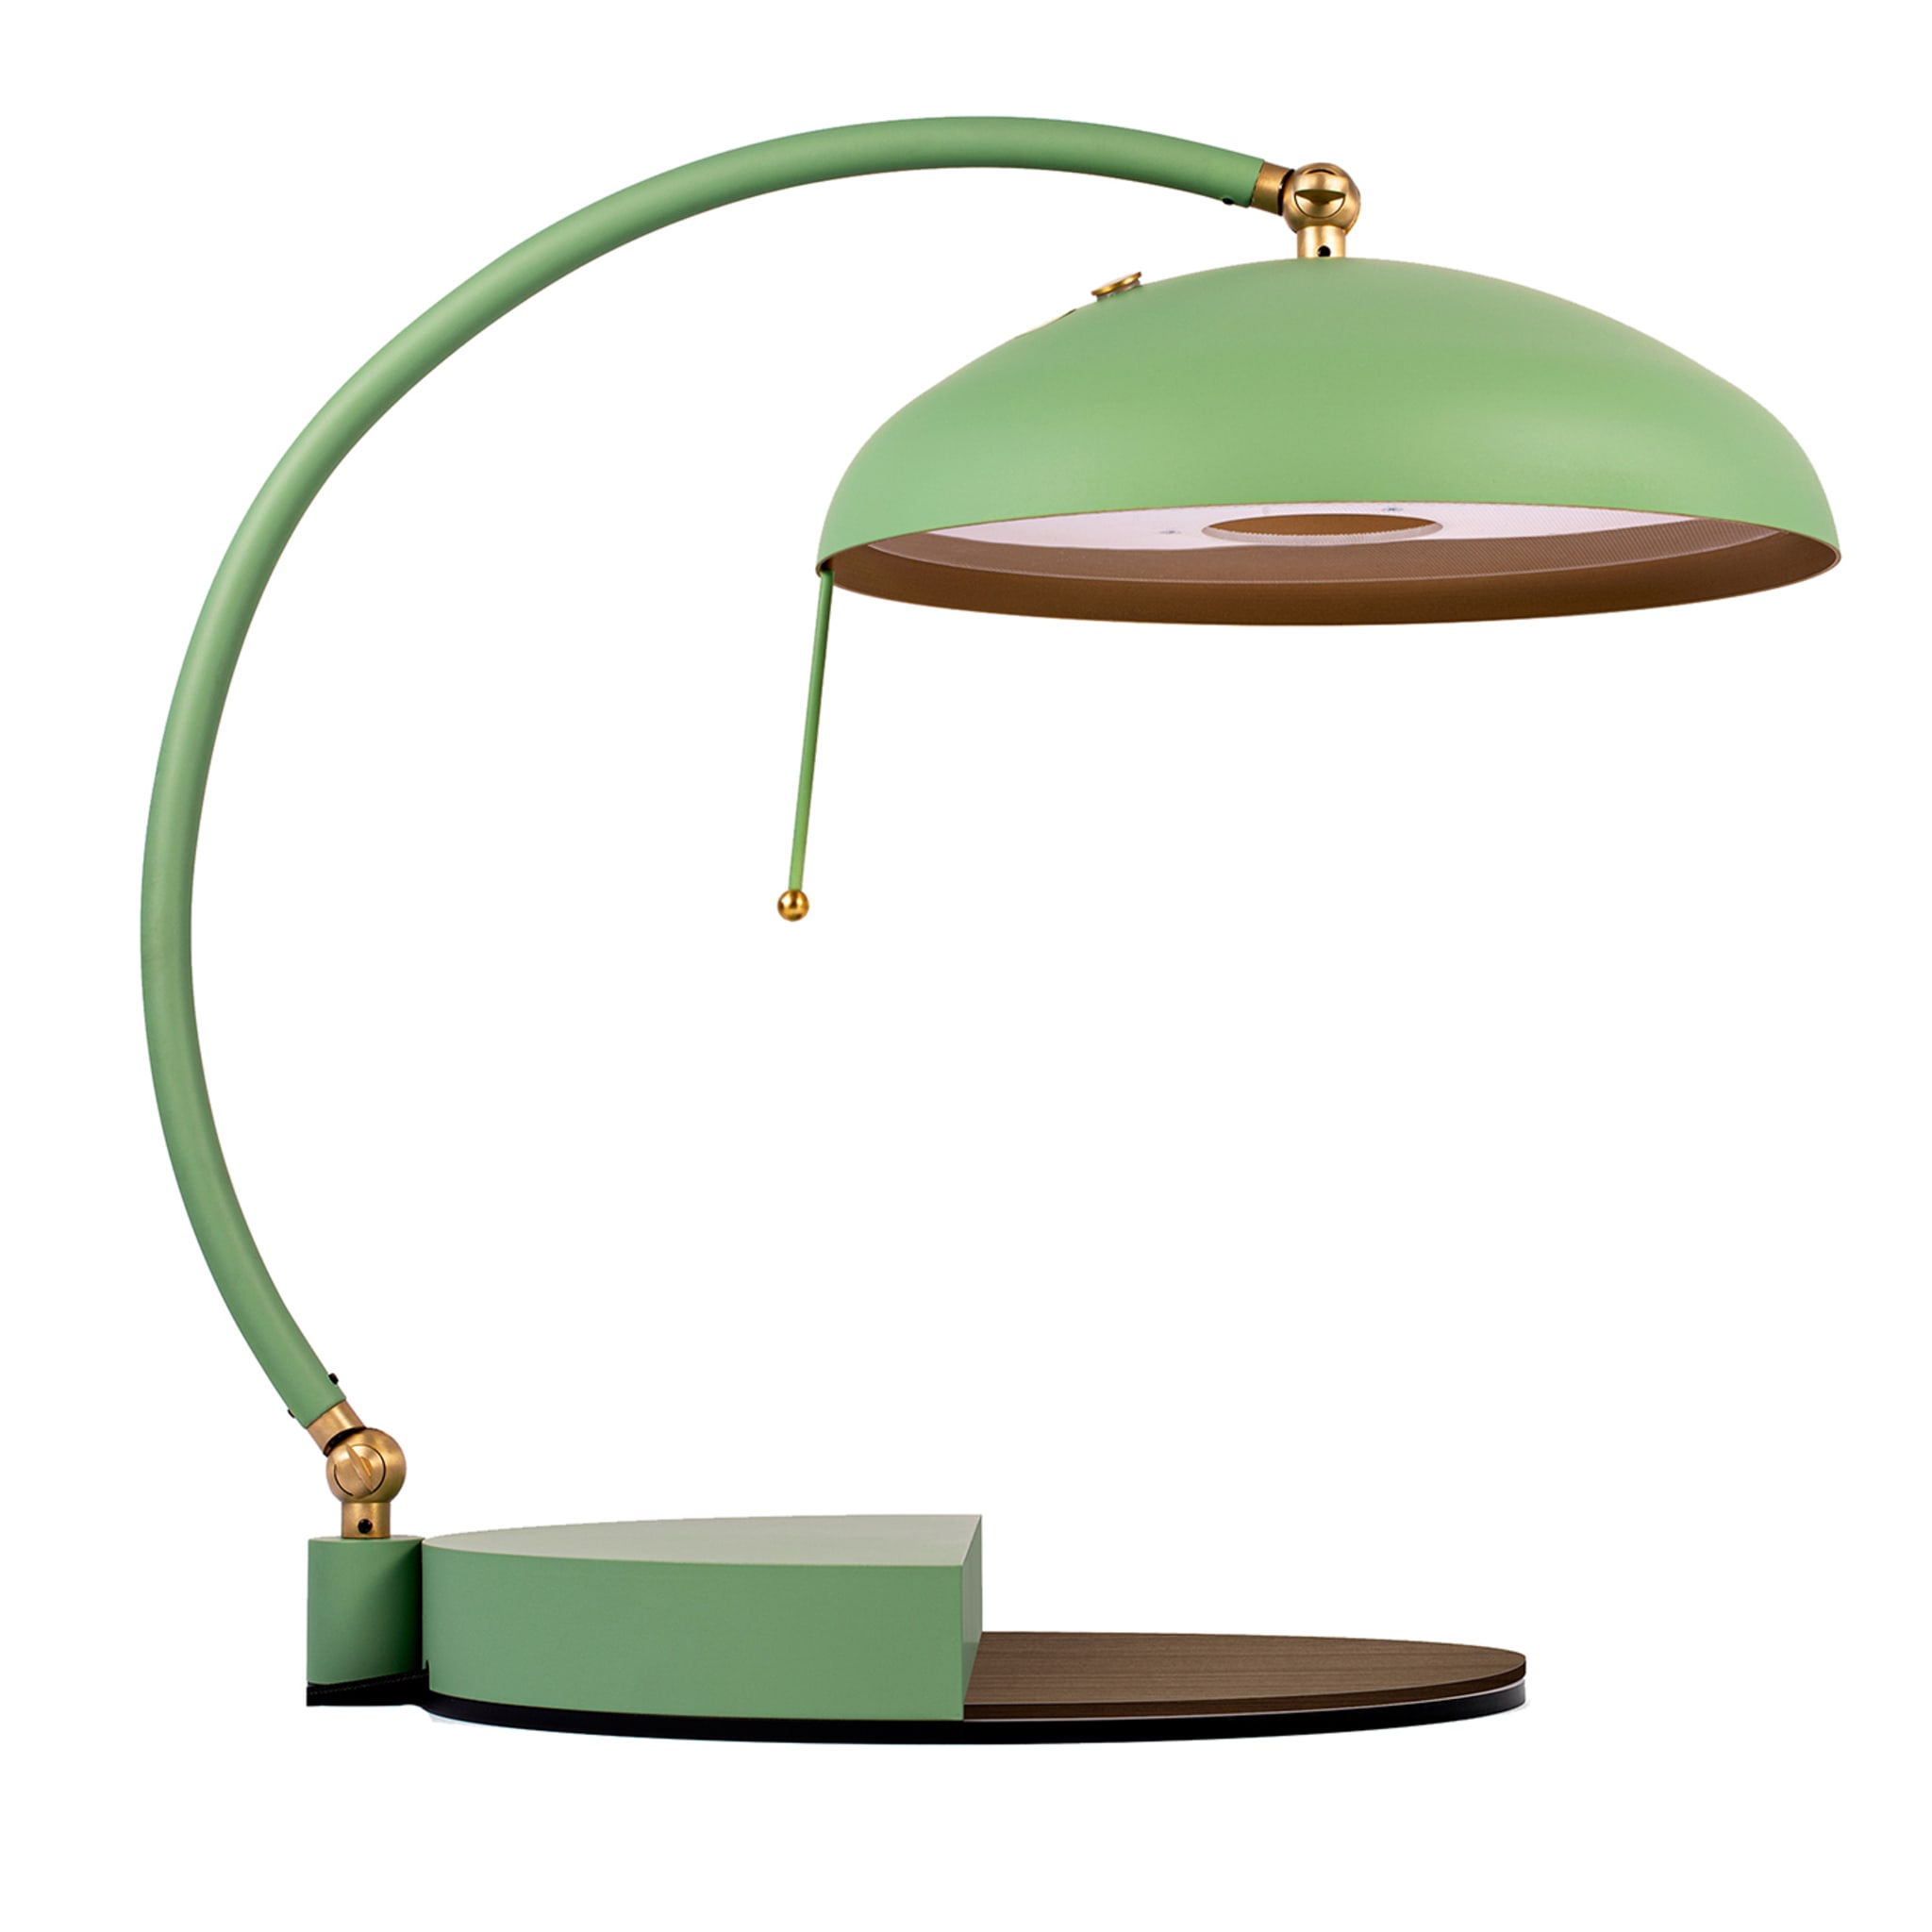 Serena Ministeriale Green Table Lamp with Walnut Wood Details - Main view